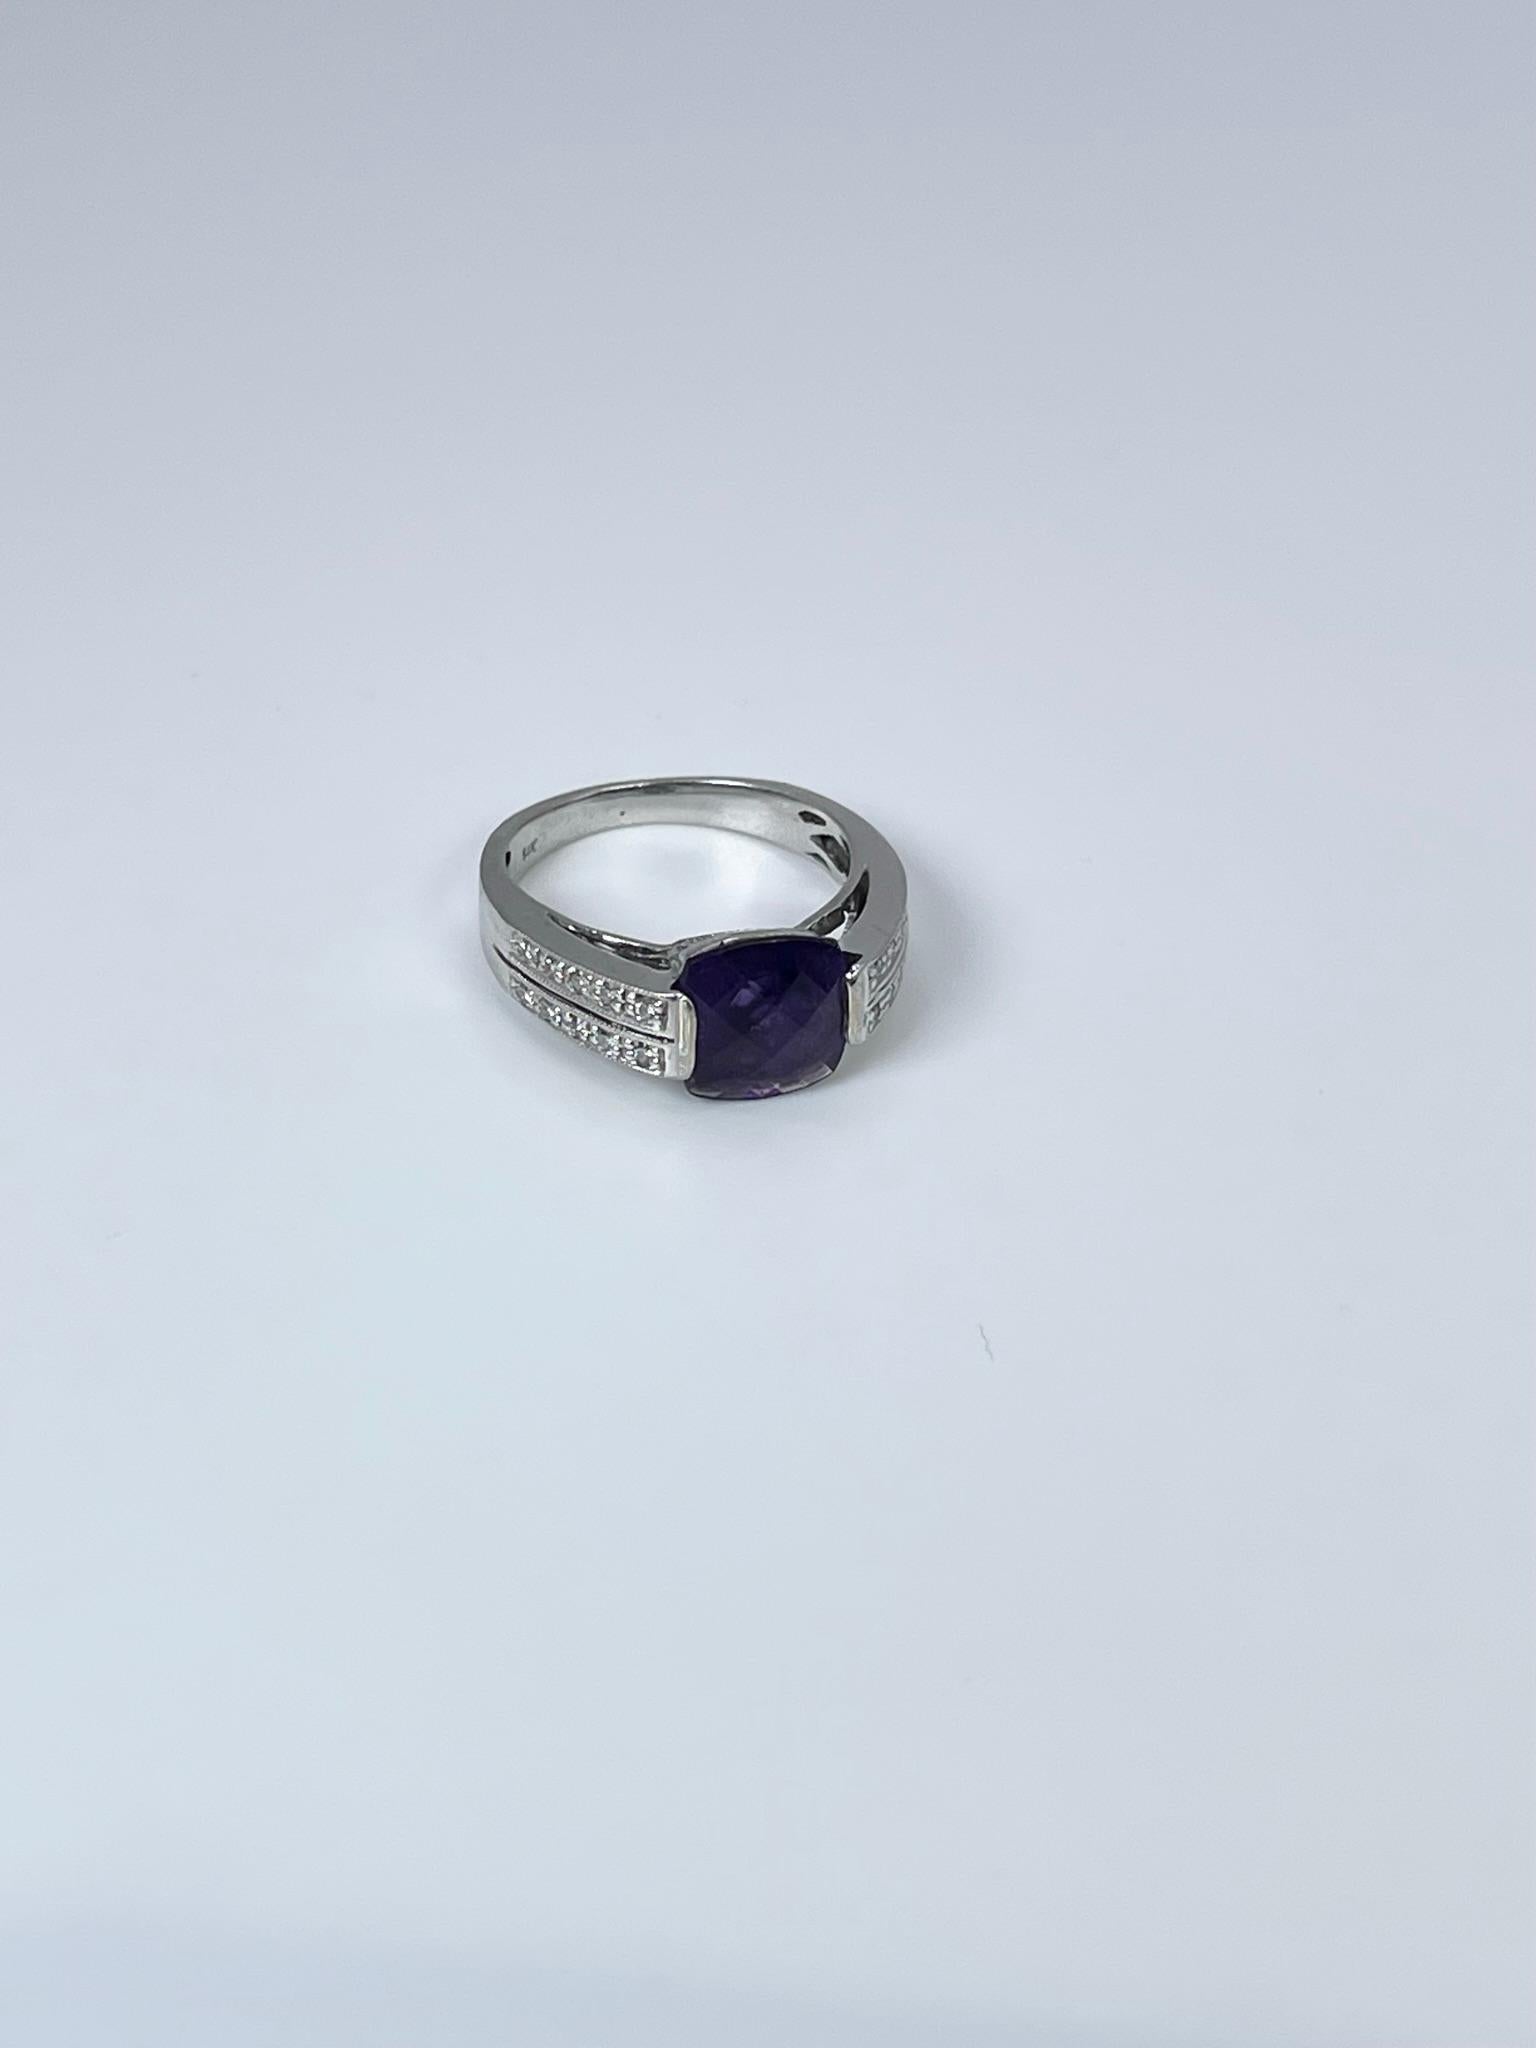 Amethyst & Diamond ring in 14KT white gold. Stunning cocktail ring.

GRAM WEIGHT: 4.55gr
METAL: 14KT white gold

NATURAL DIAMOND(S)
Cut: Round
Color: G-H 
Clarity: SI (average)
Carat: 0.10ct

NATURAL AMETHYST
Cut: Oval
Color: Purple
Clarity: